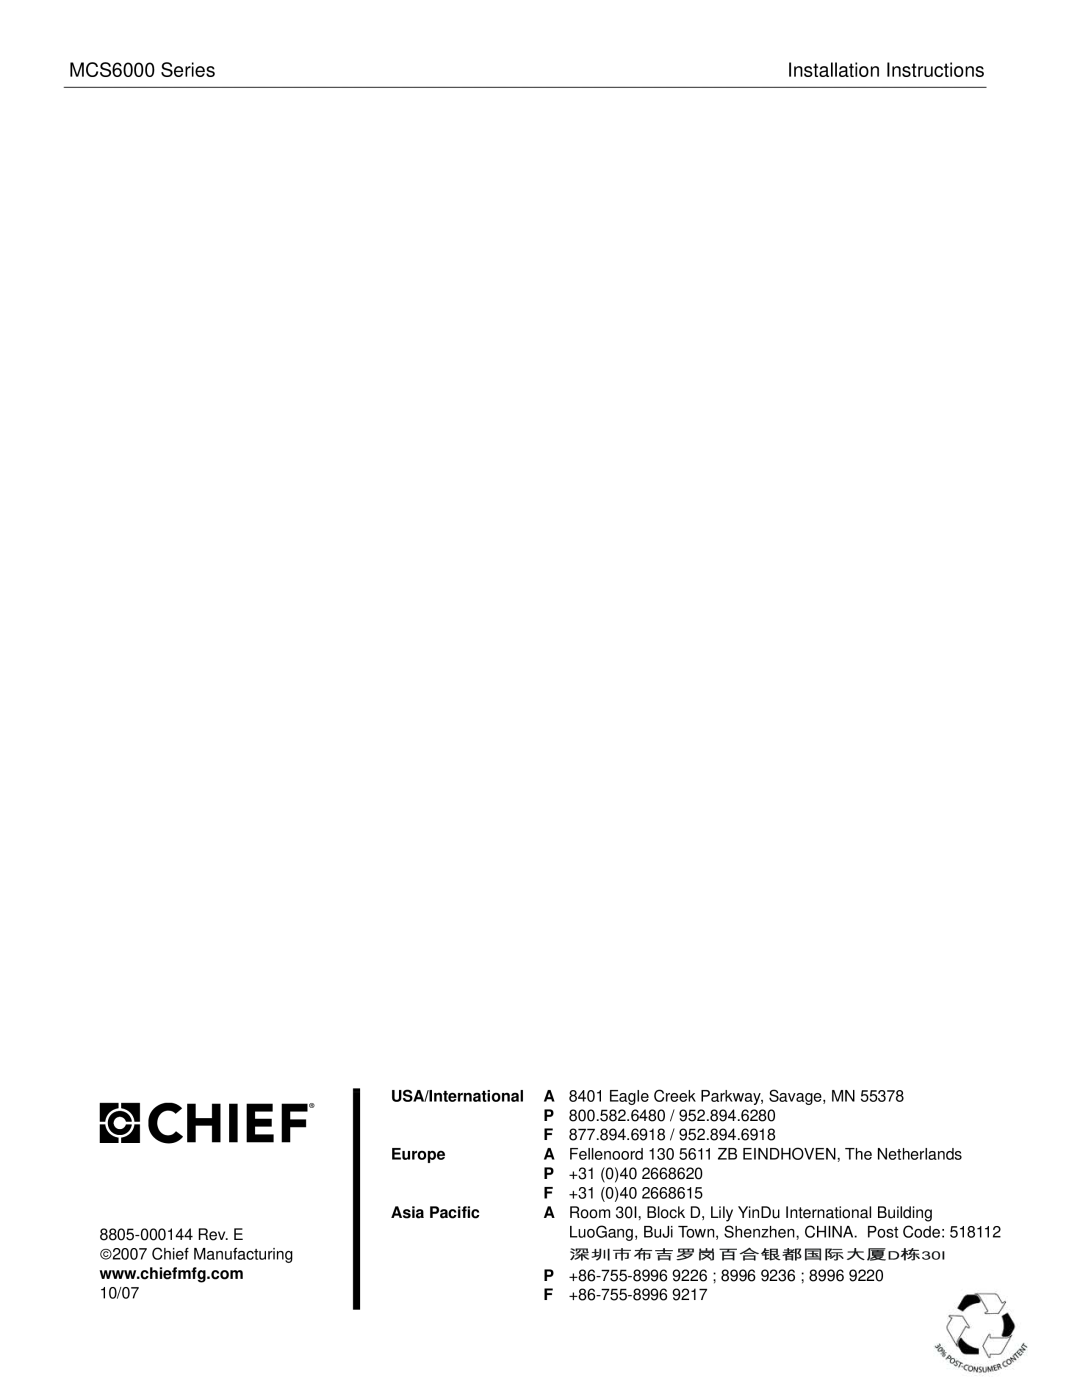 Chief Manufacturing MCS6000 Series installation instructions Installation Instructions, USA/International 